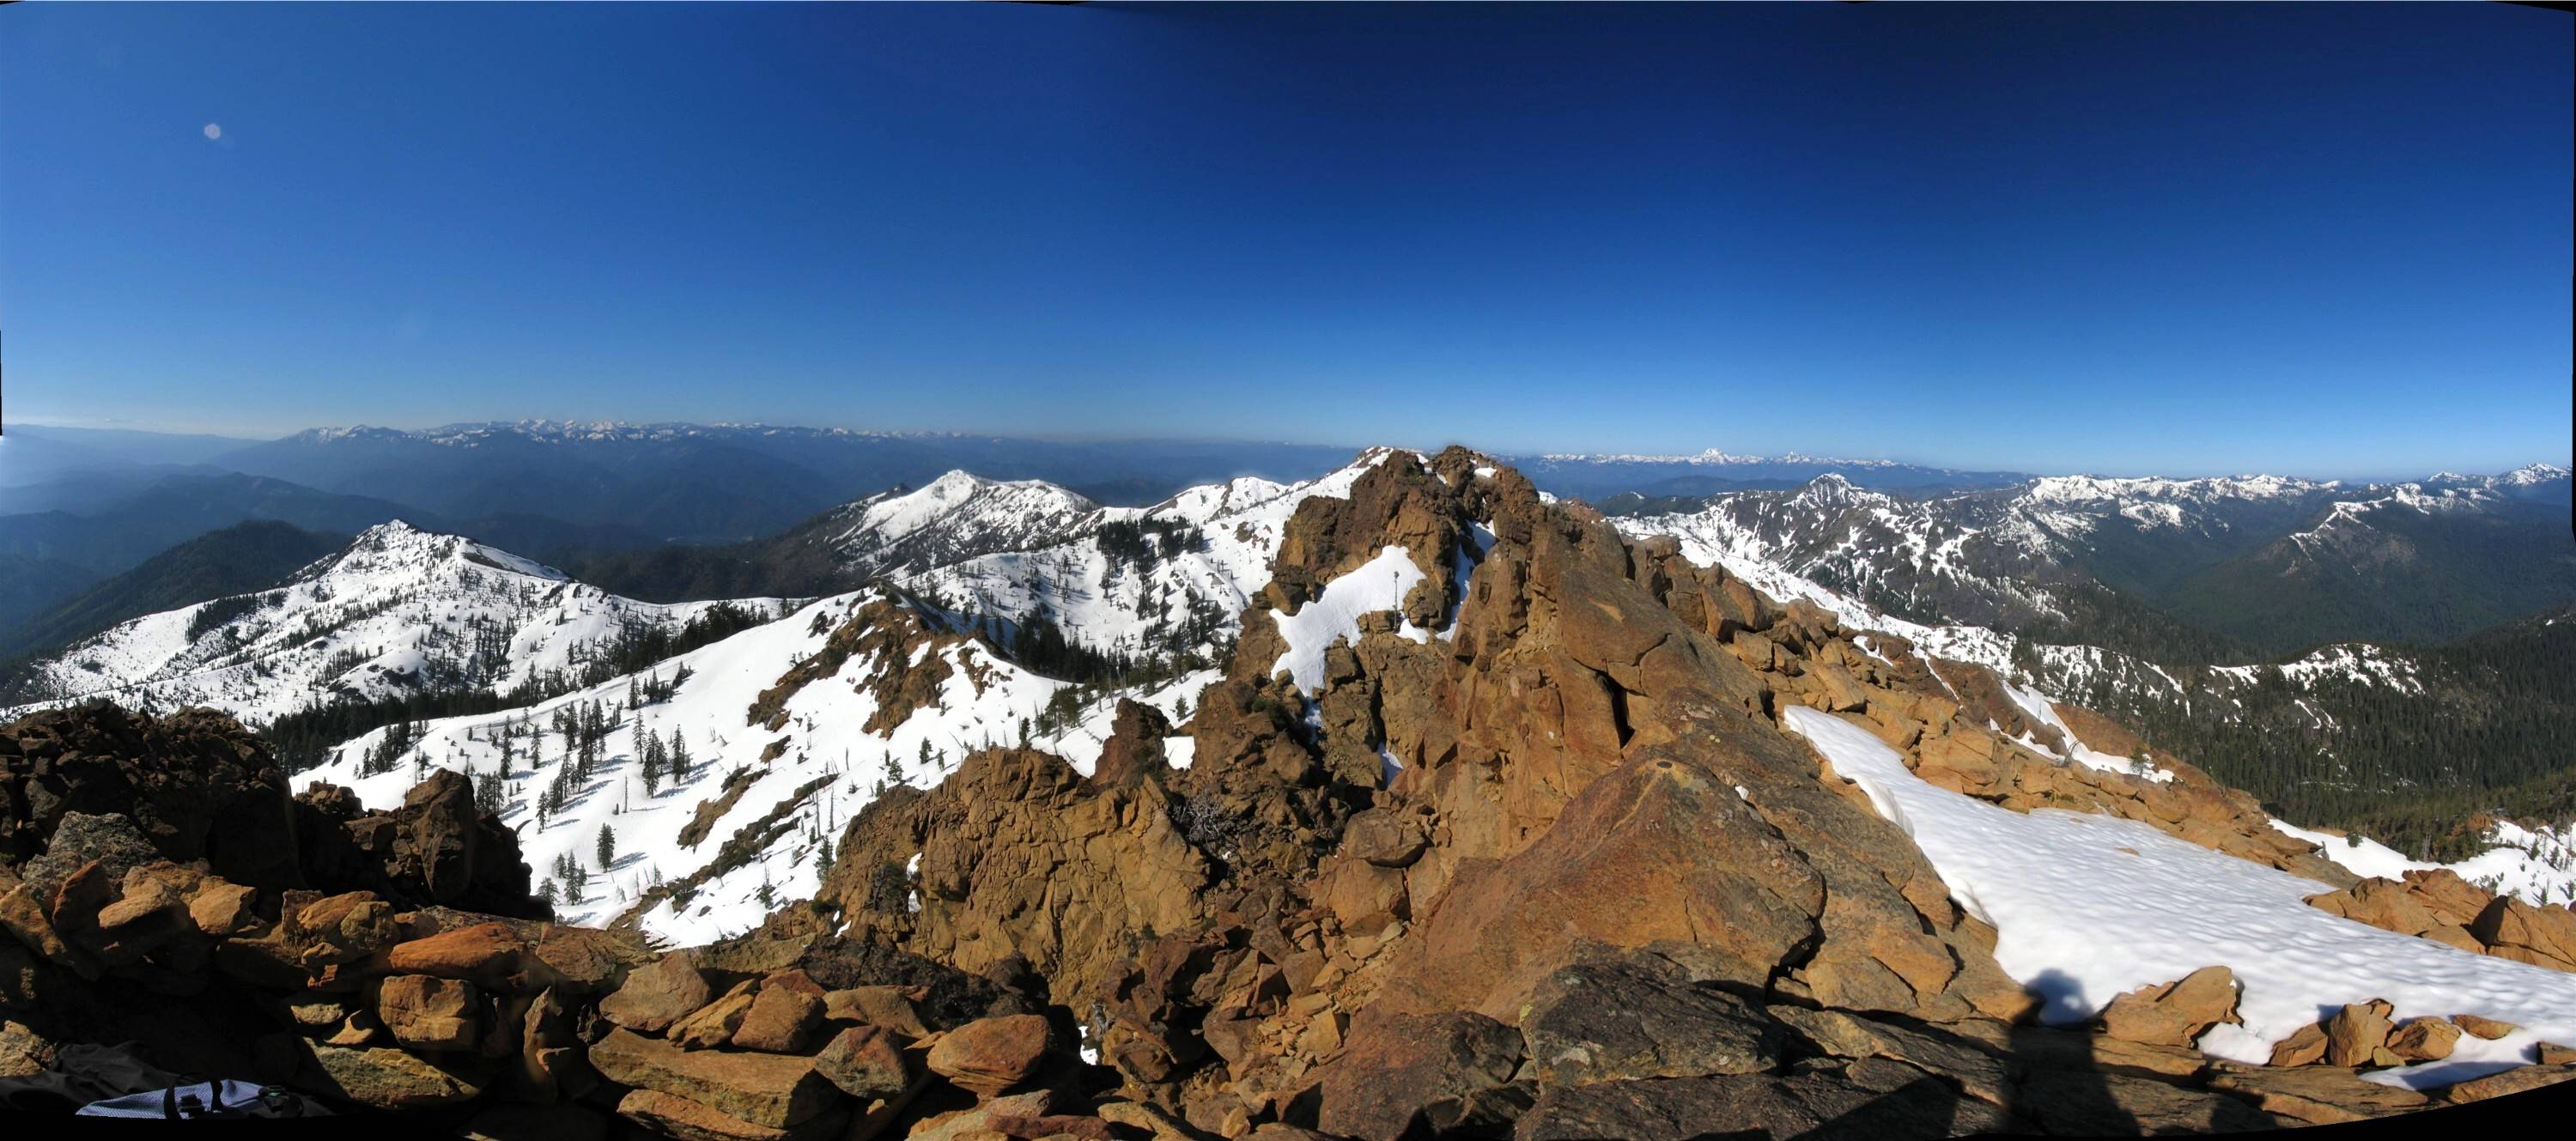 Red Butte Summit Panorama -6739 ft.